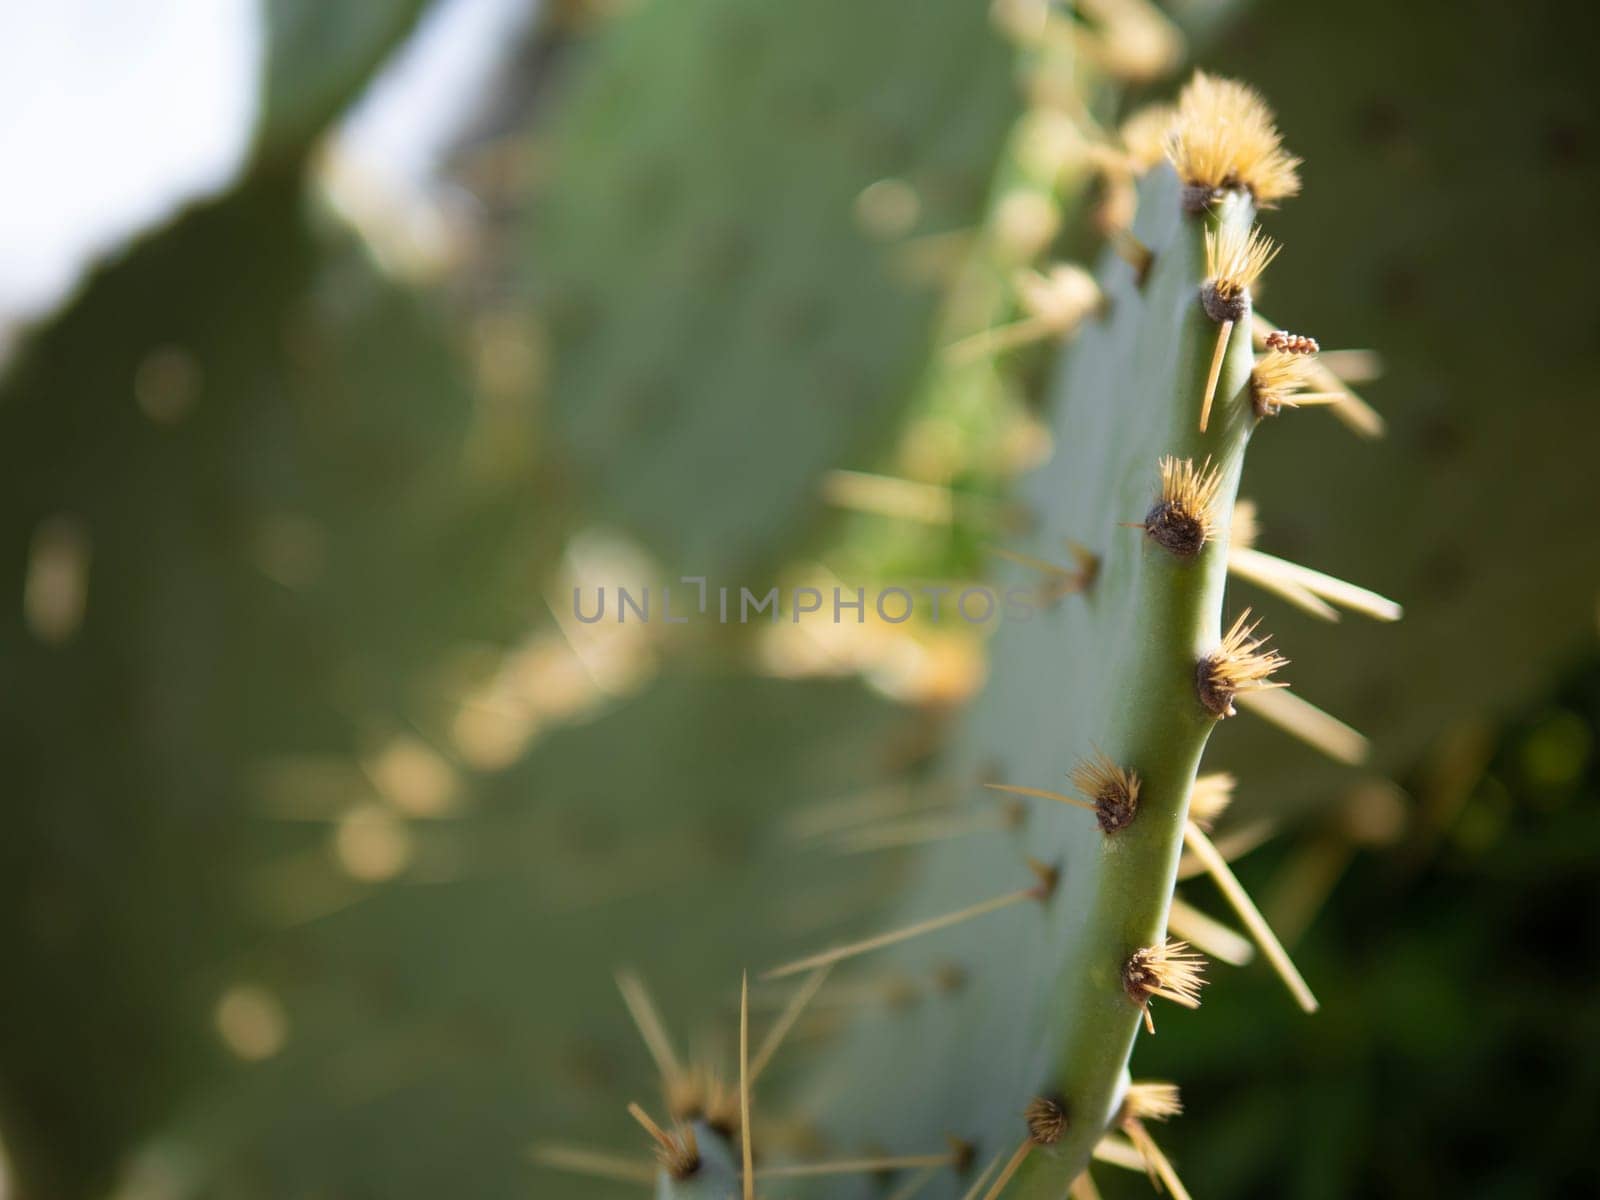 A closeup of an Eastern prickly pear, a flowering plant with green cactus pads and yellow thorns, showcasing the beauty of natures terrestrial vegetation